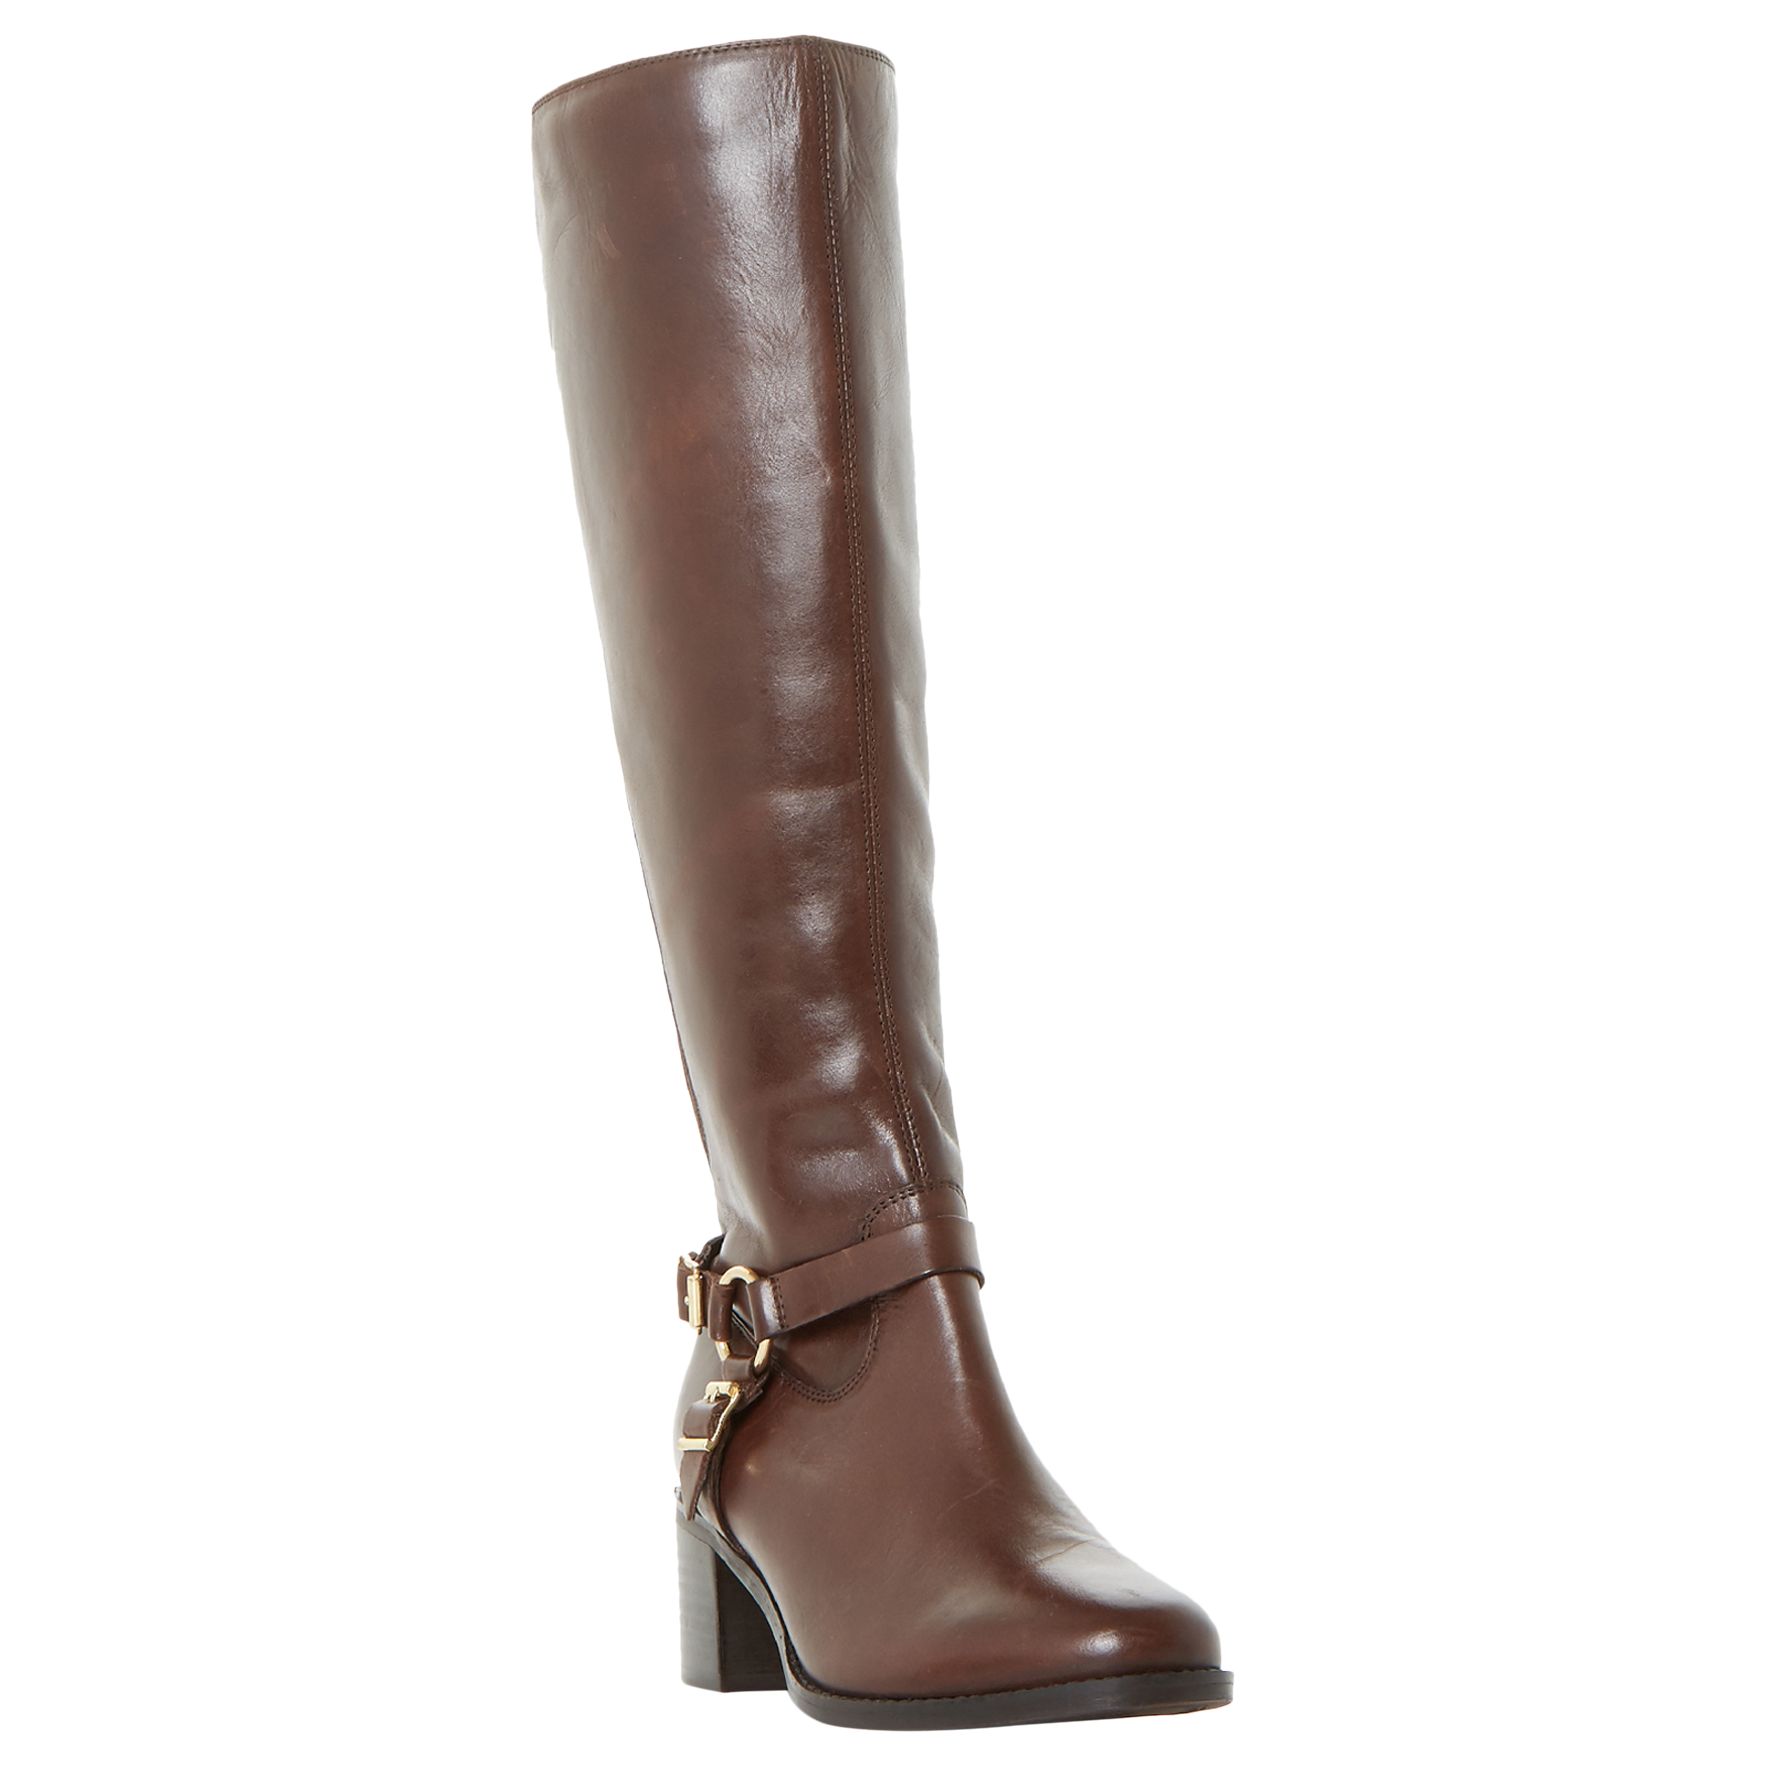 Dune Vicky Block Heeled Knee High Boots, Brown, 6